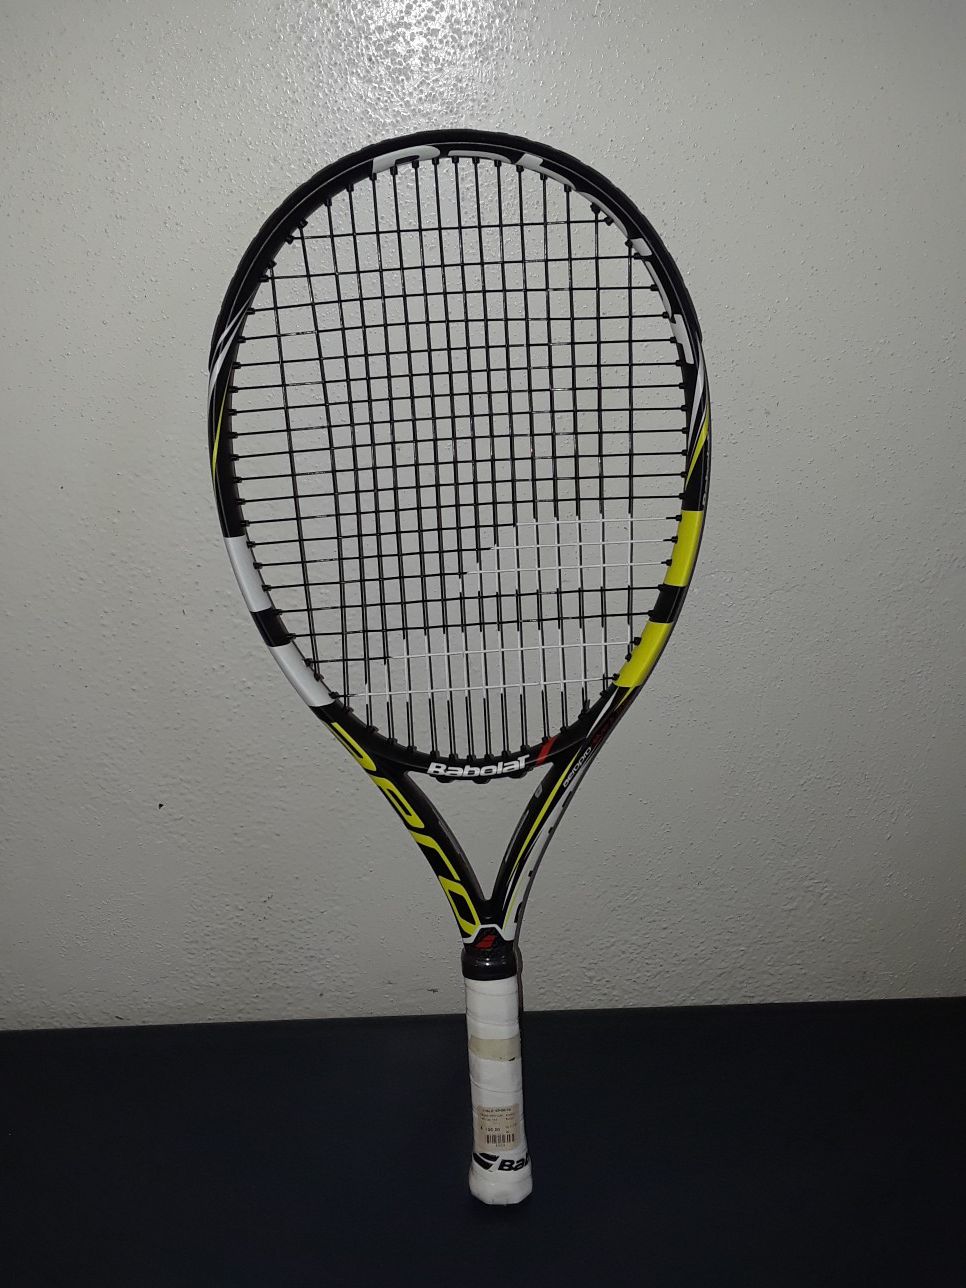 Youth tennis racket